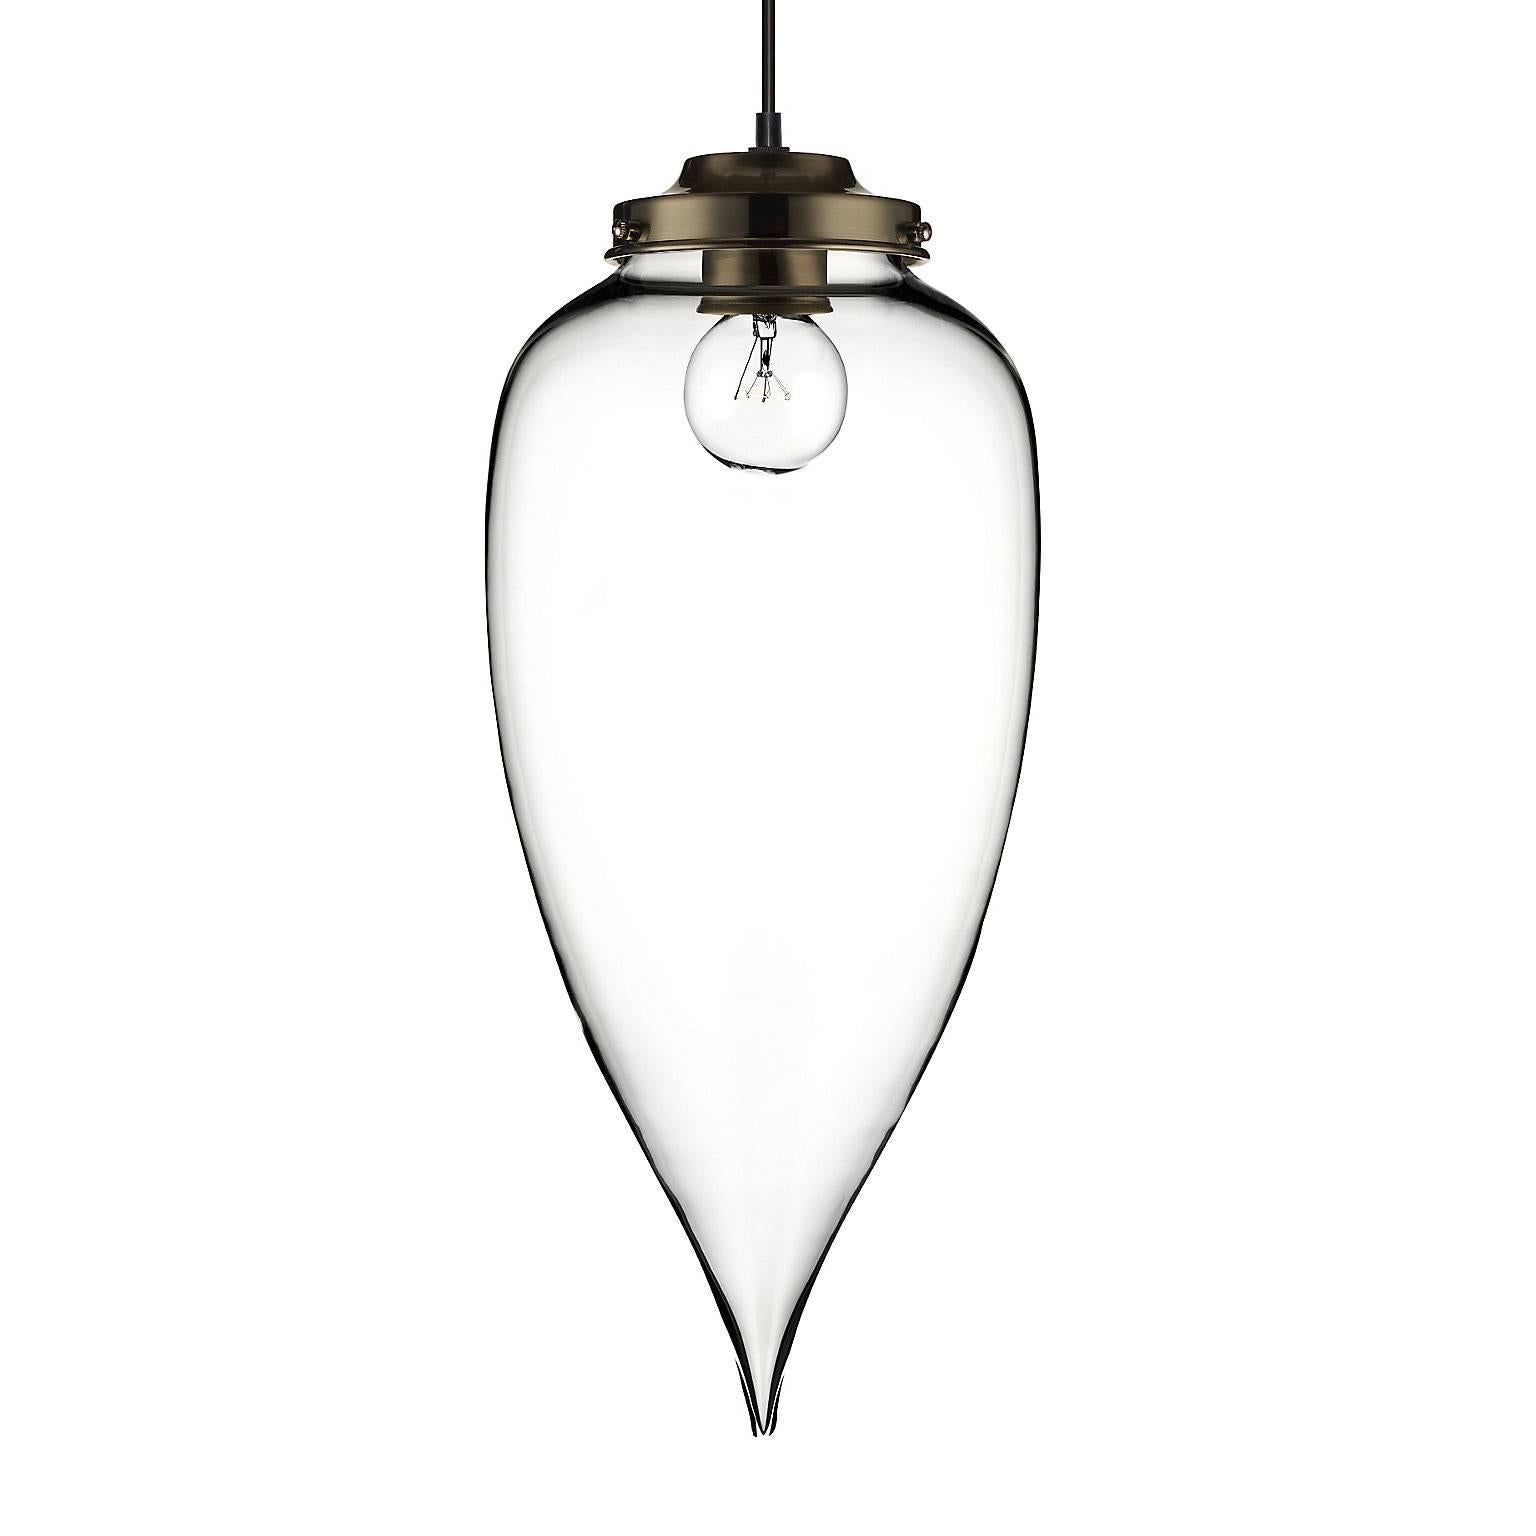 Comprised of the grand and petite pendant, the Pointelle series creates an enchanting cascade of light. Every single glass pendant light that comes from Niche is hand-blown by real human beings in a state-of-the-art studio located in Beacon, New